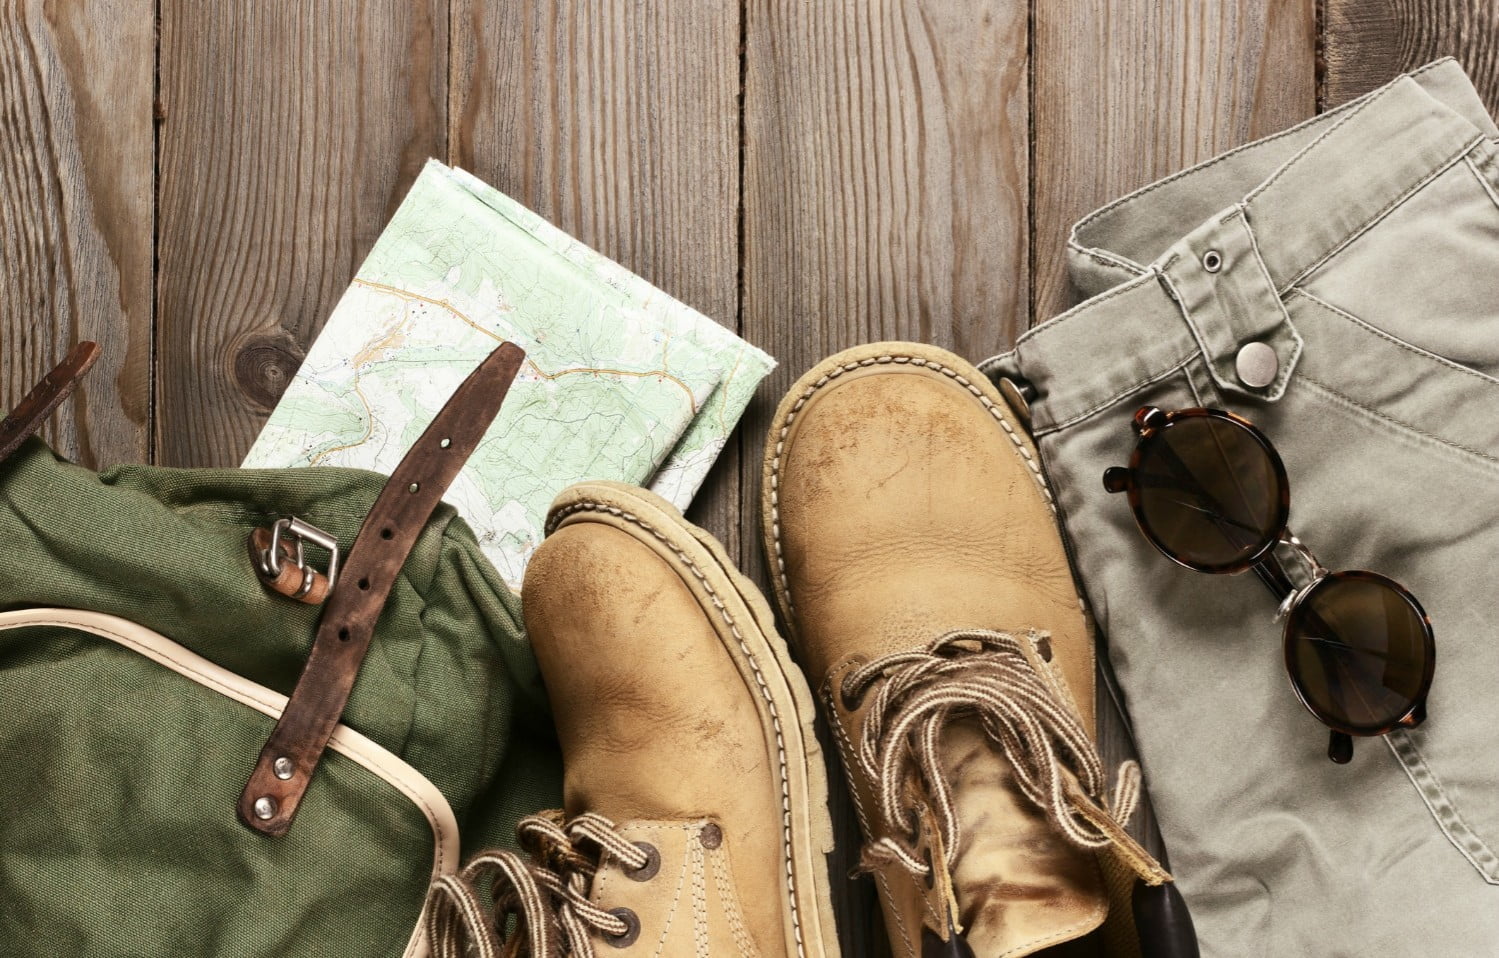 Travel accessories set on wooden background: old hiking leather boots, pants, backpack, map and sunglasses | Marion Tallgrass Trail